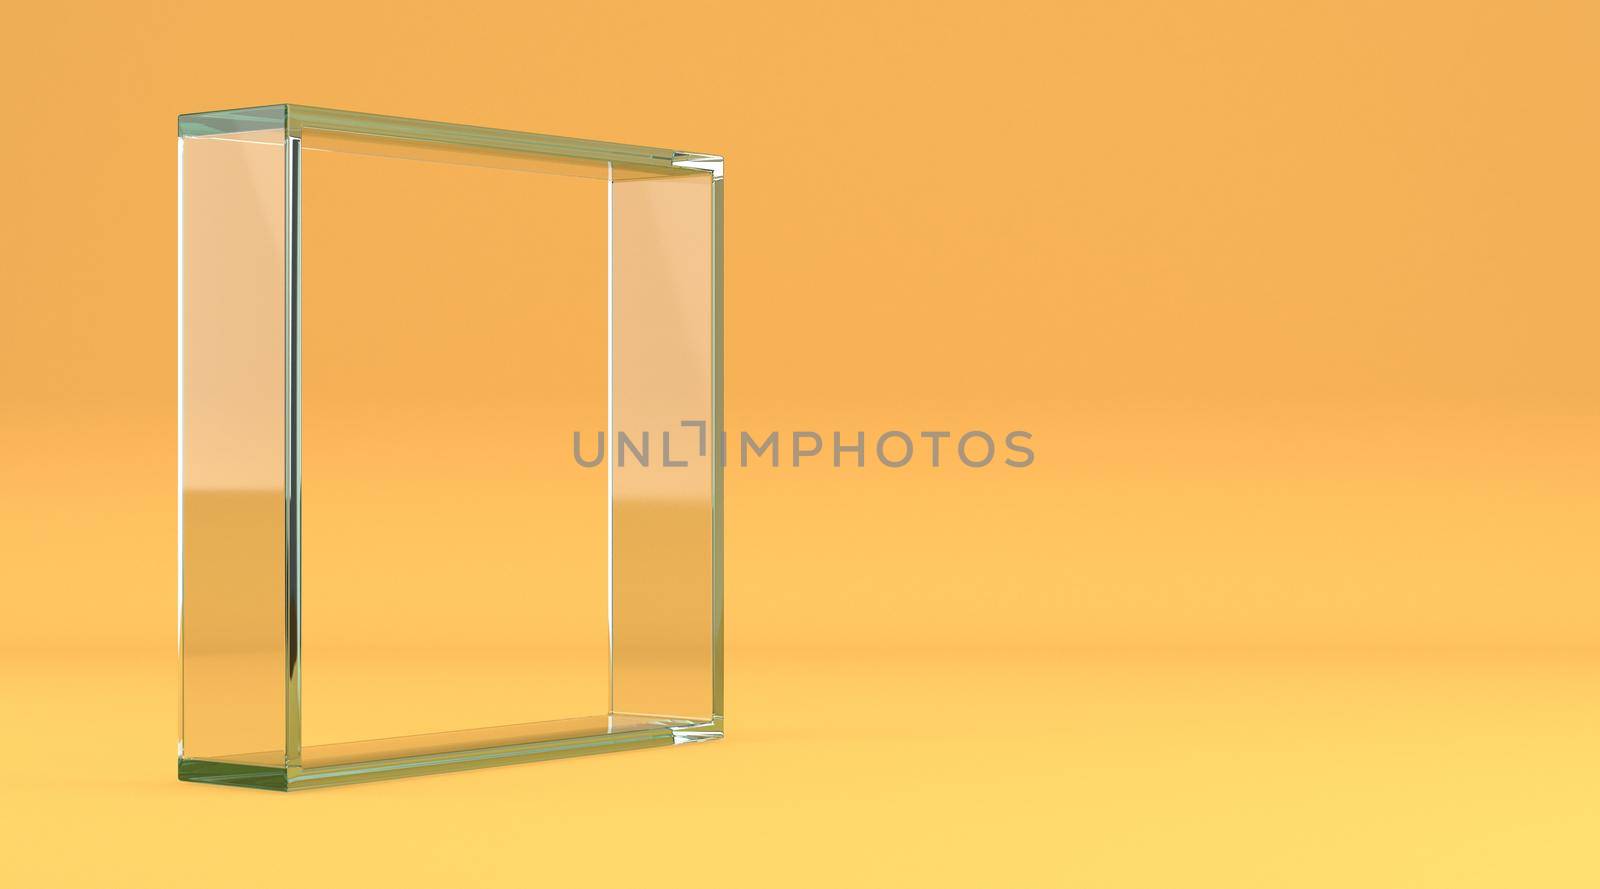 Glass rectangle frame 3D rendering illustration isolated on yellow background